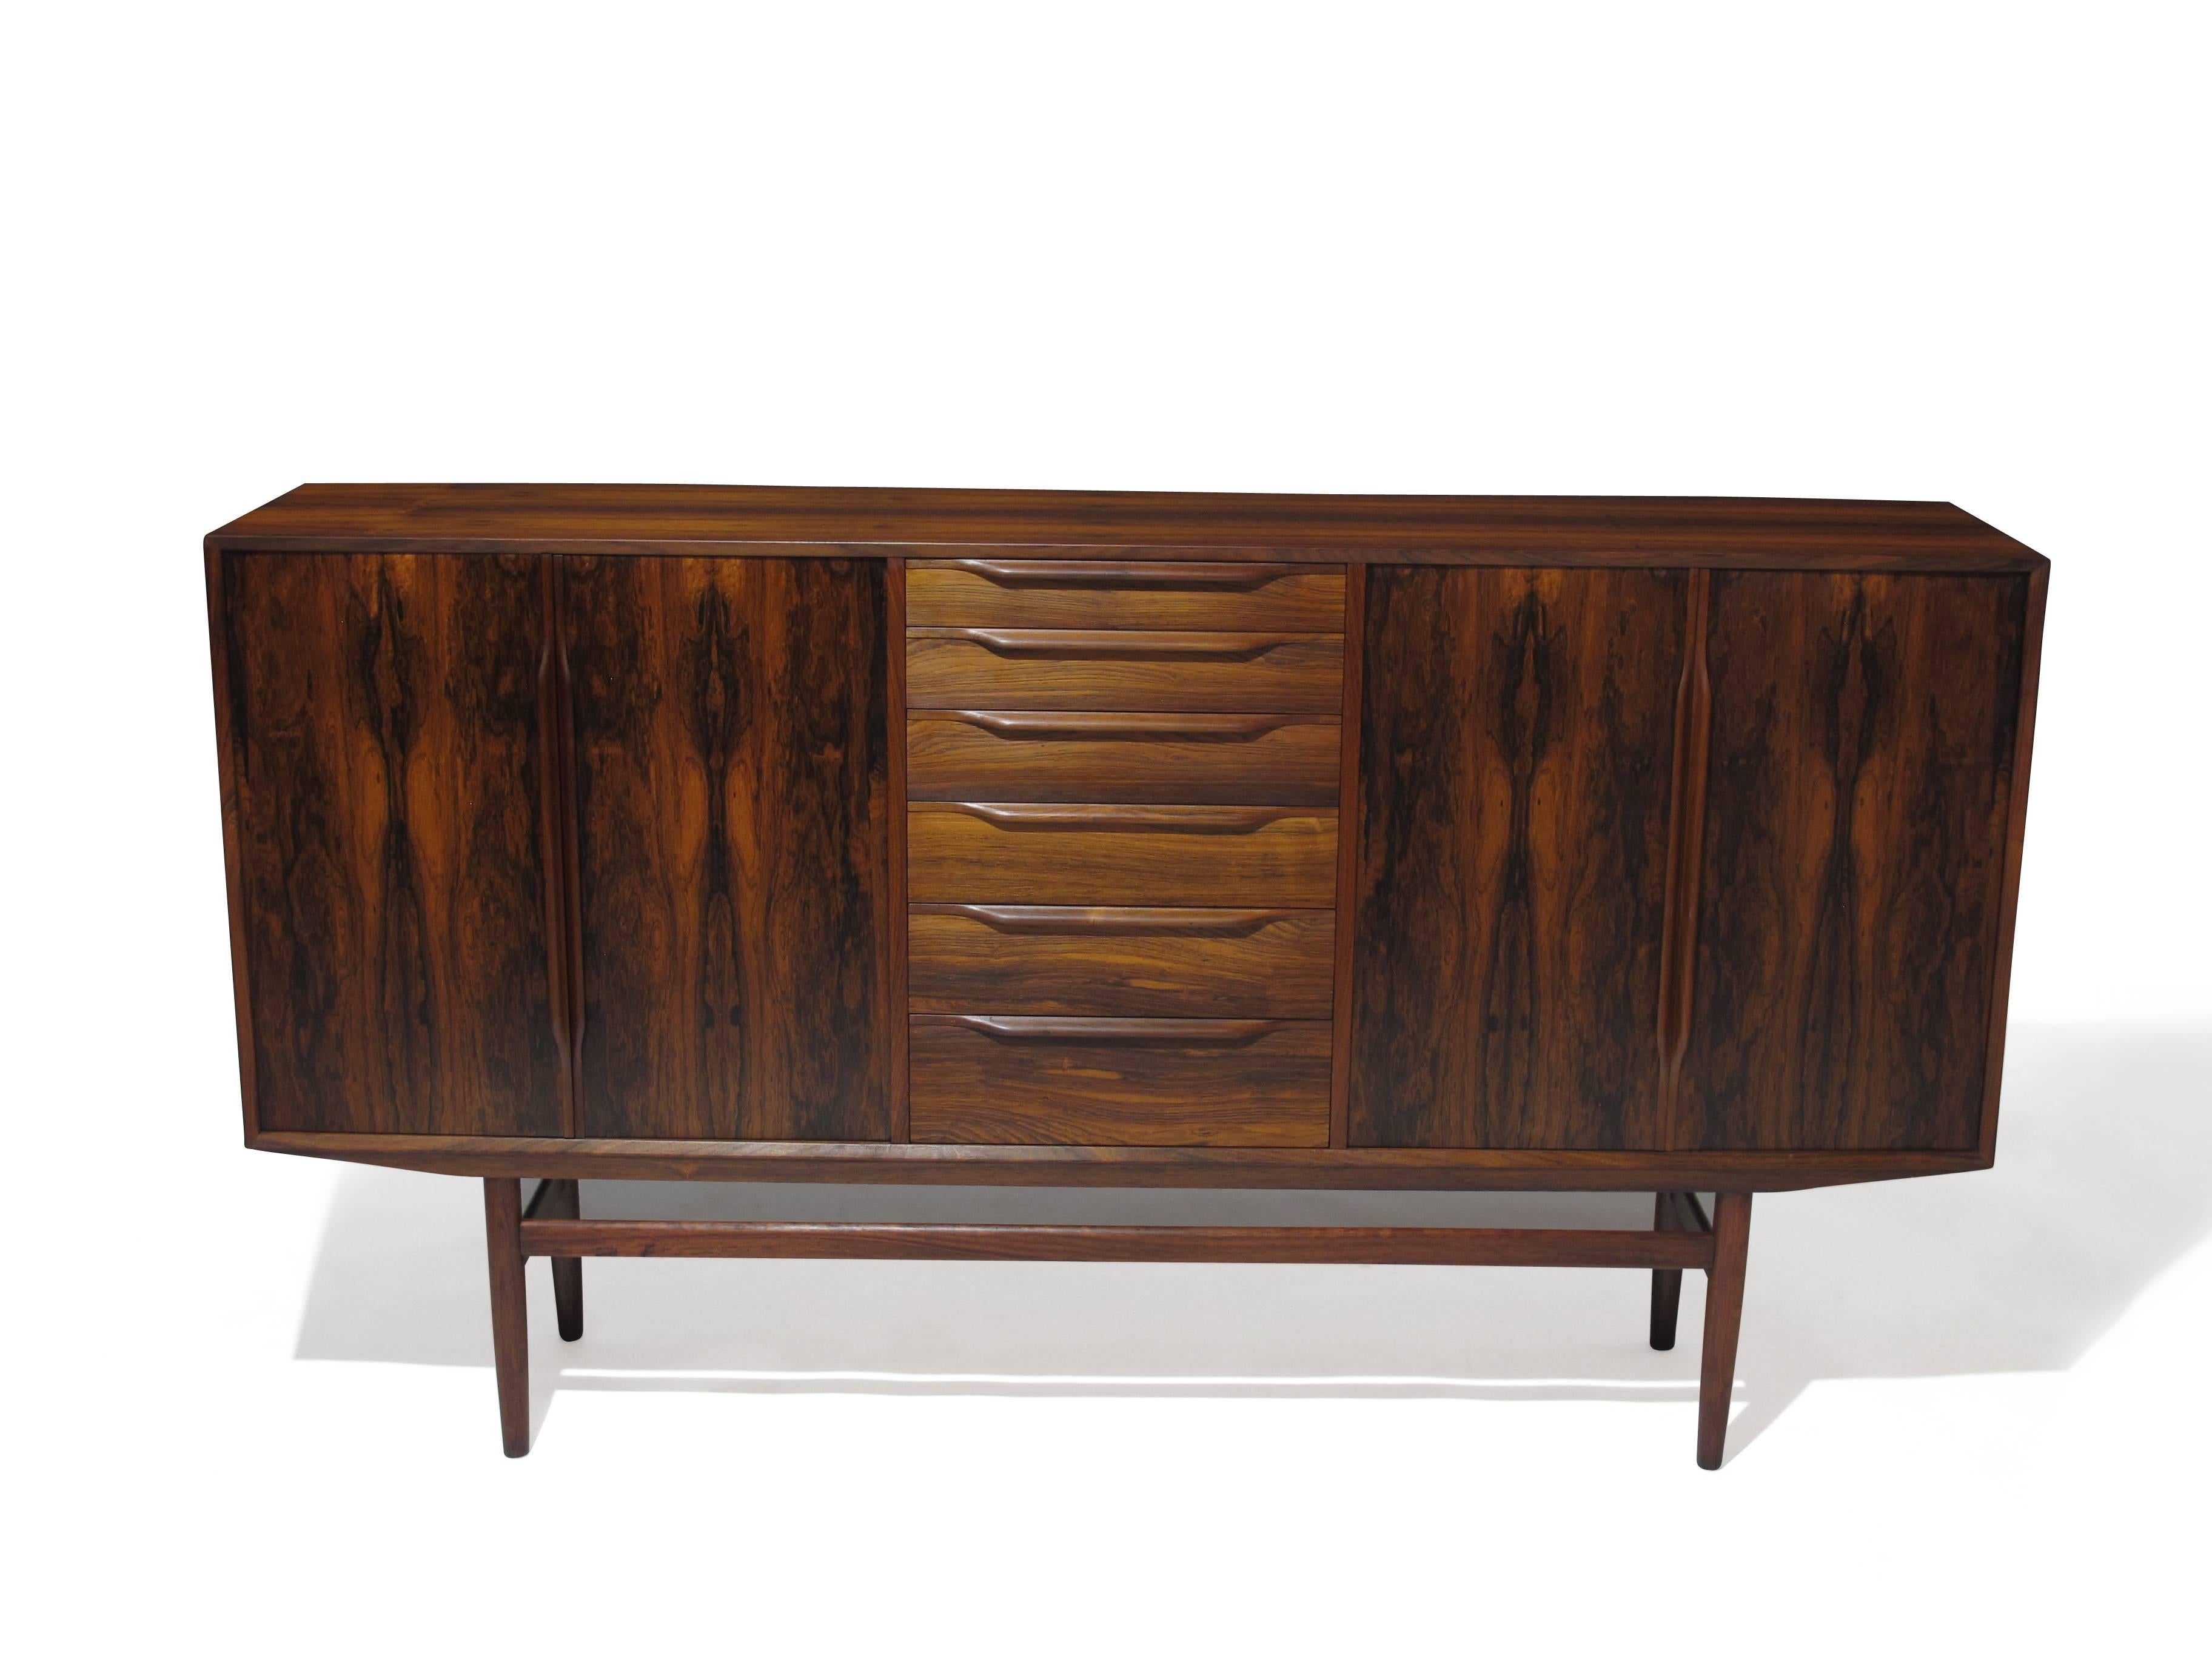 Danish credenza handcrafted of rosewood with book-matched graining, carved pulls and solid turned legs and stretchers. Centre section contains six drawers increasing in capacity from top to bottom. The outer door double door sections contain three